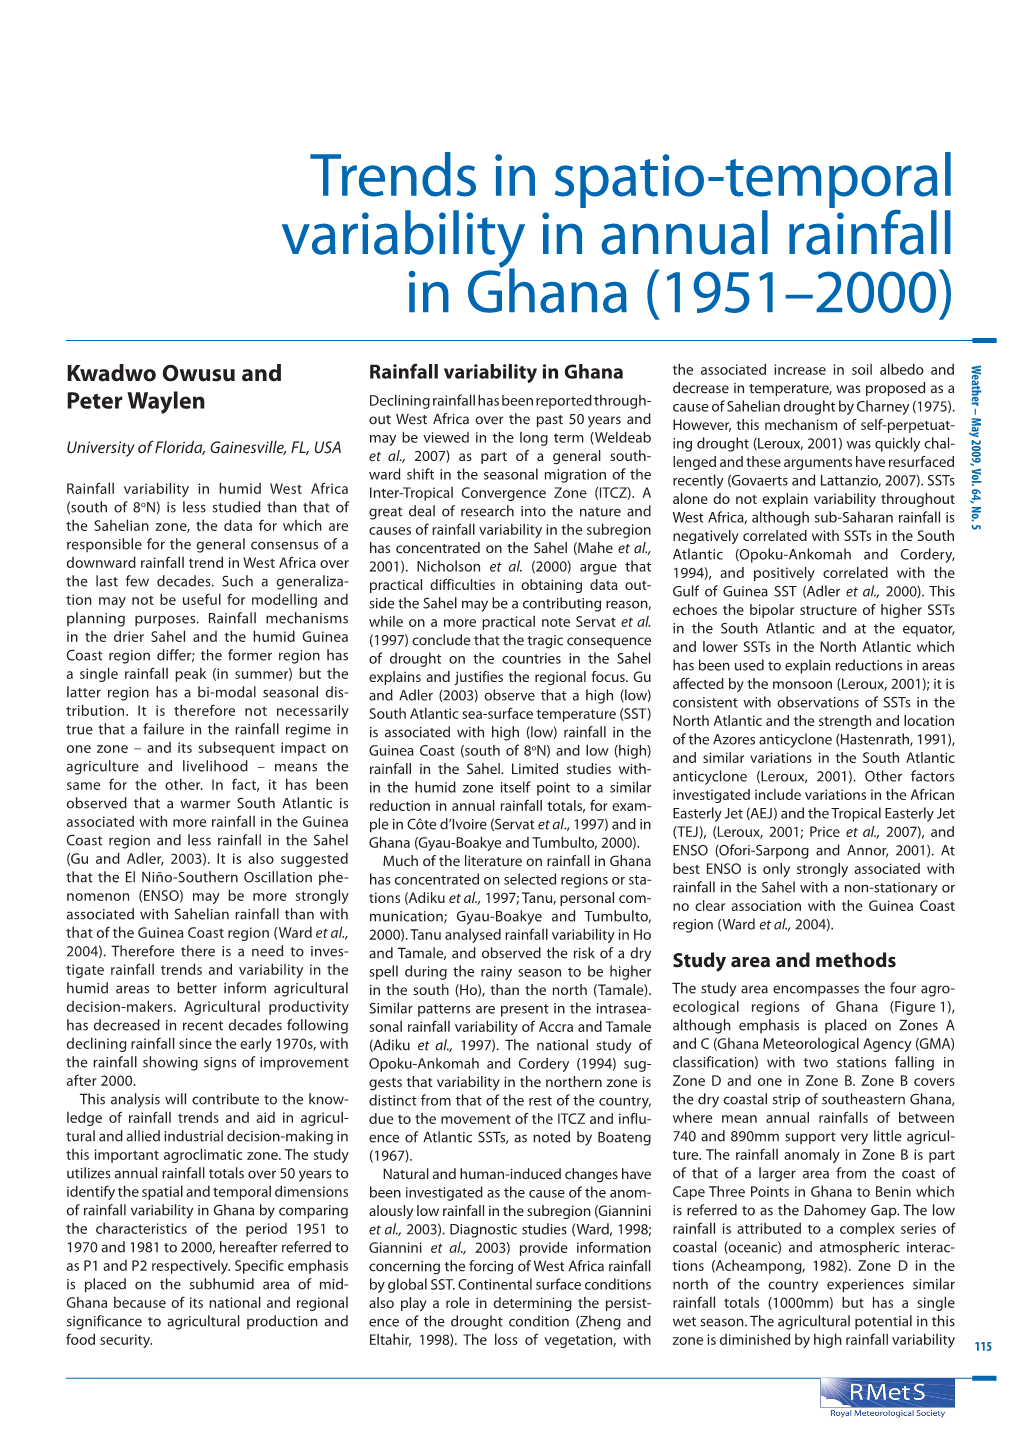 Trends in Spatio-Temporal Variability in Annual Rainfall in Ghana (1951-2000)